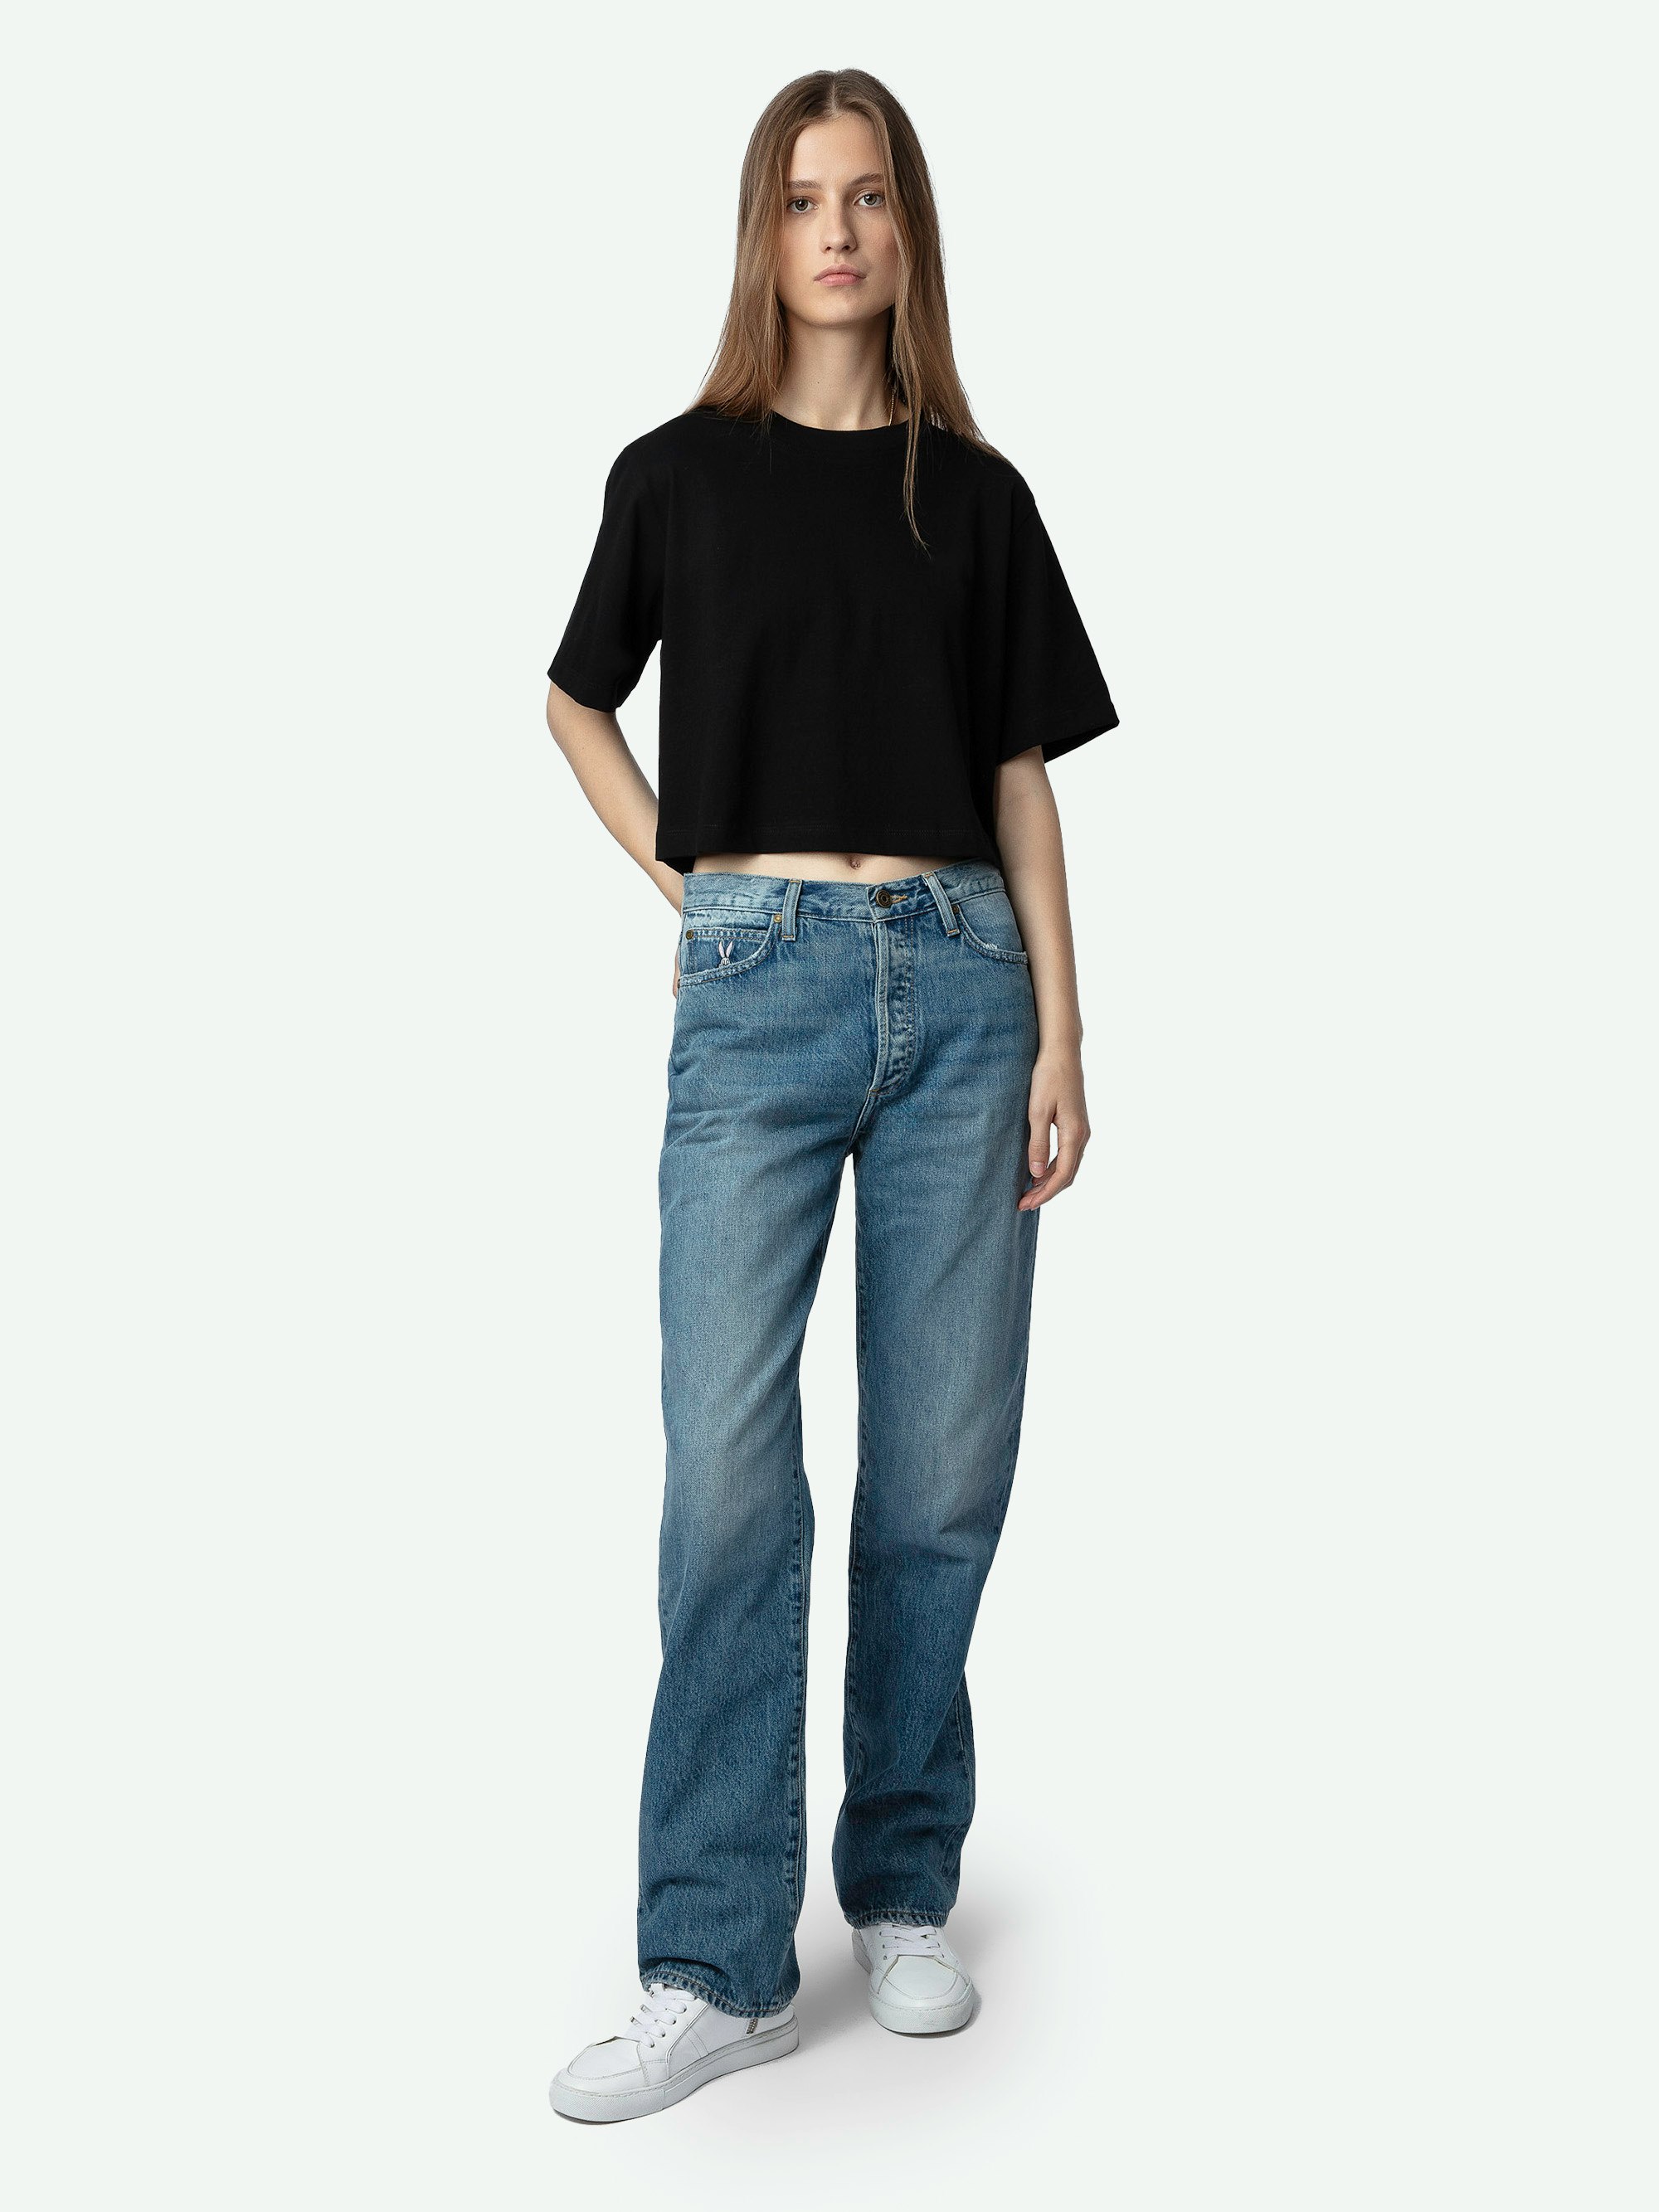 Lennox Cropped Tee - Women's faded black cropped t-shirt.